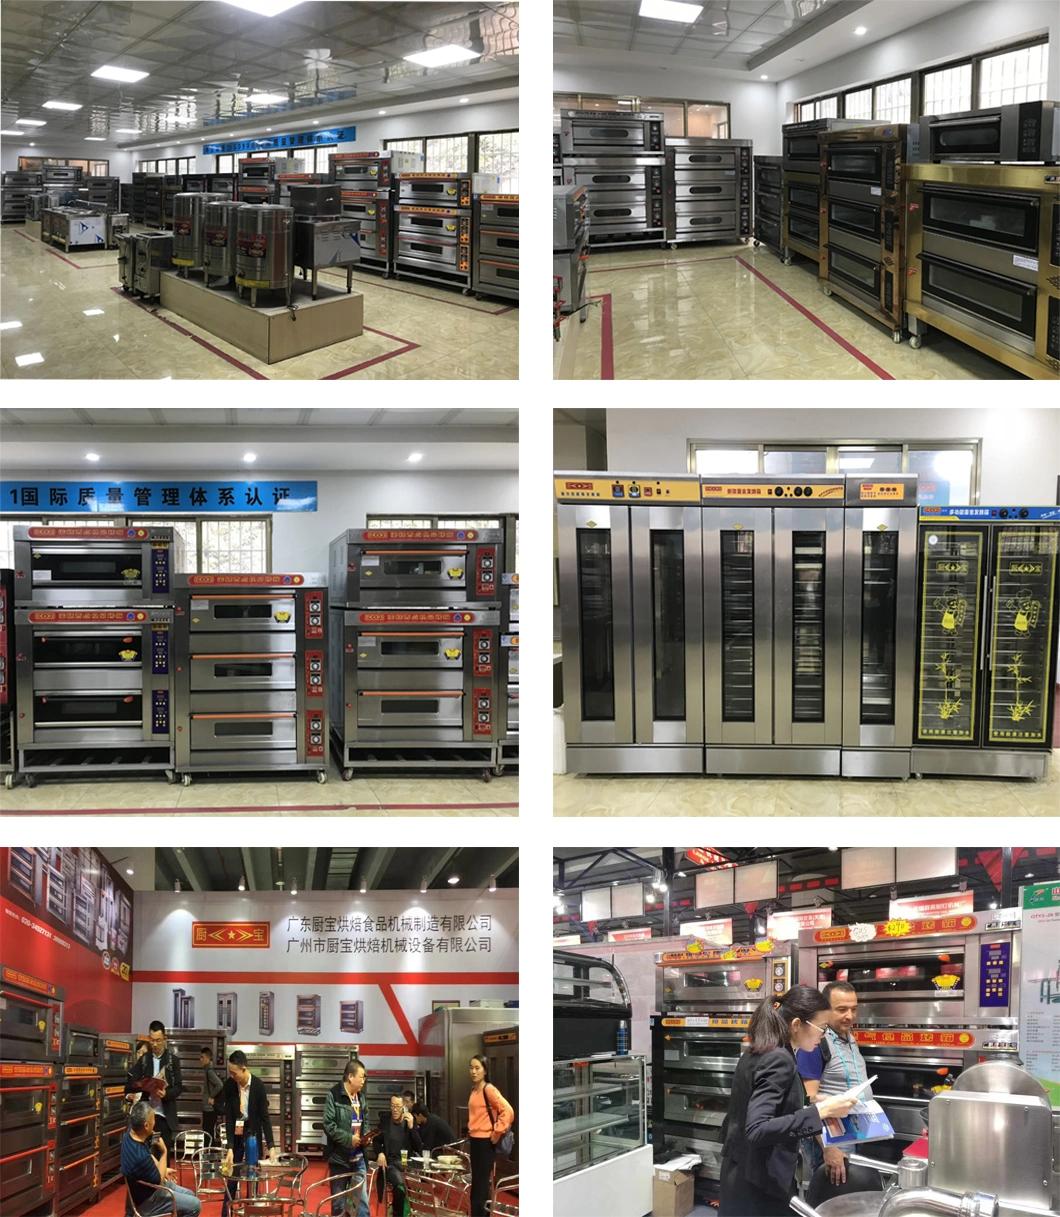 1 Deck 2 Trays Electric Pizza Oven for Commercial Kitchen Baking Equipment Bakery Machine Pizza Machinery